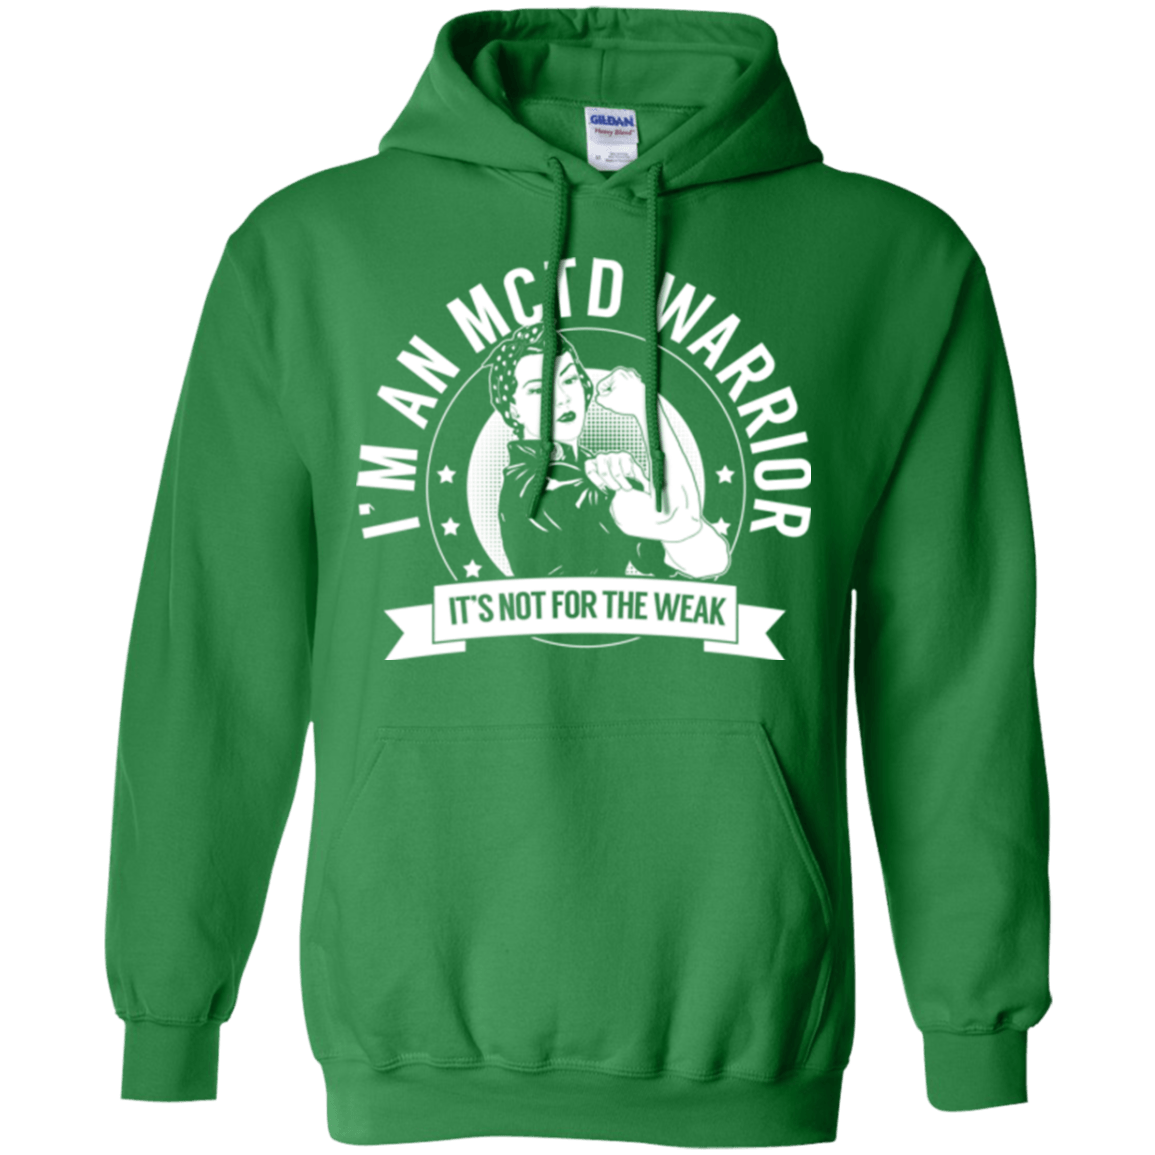 Mixed Connective Tissue Disease - MCTD Warrior Not For The Weak Pullover Hoodie 8 oz. - The Unchargeables